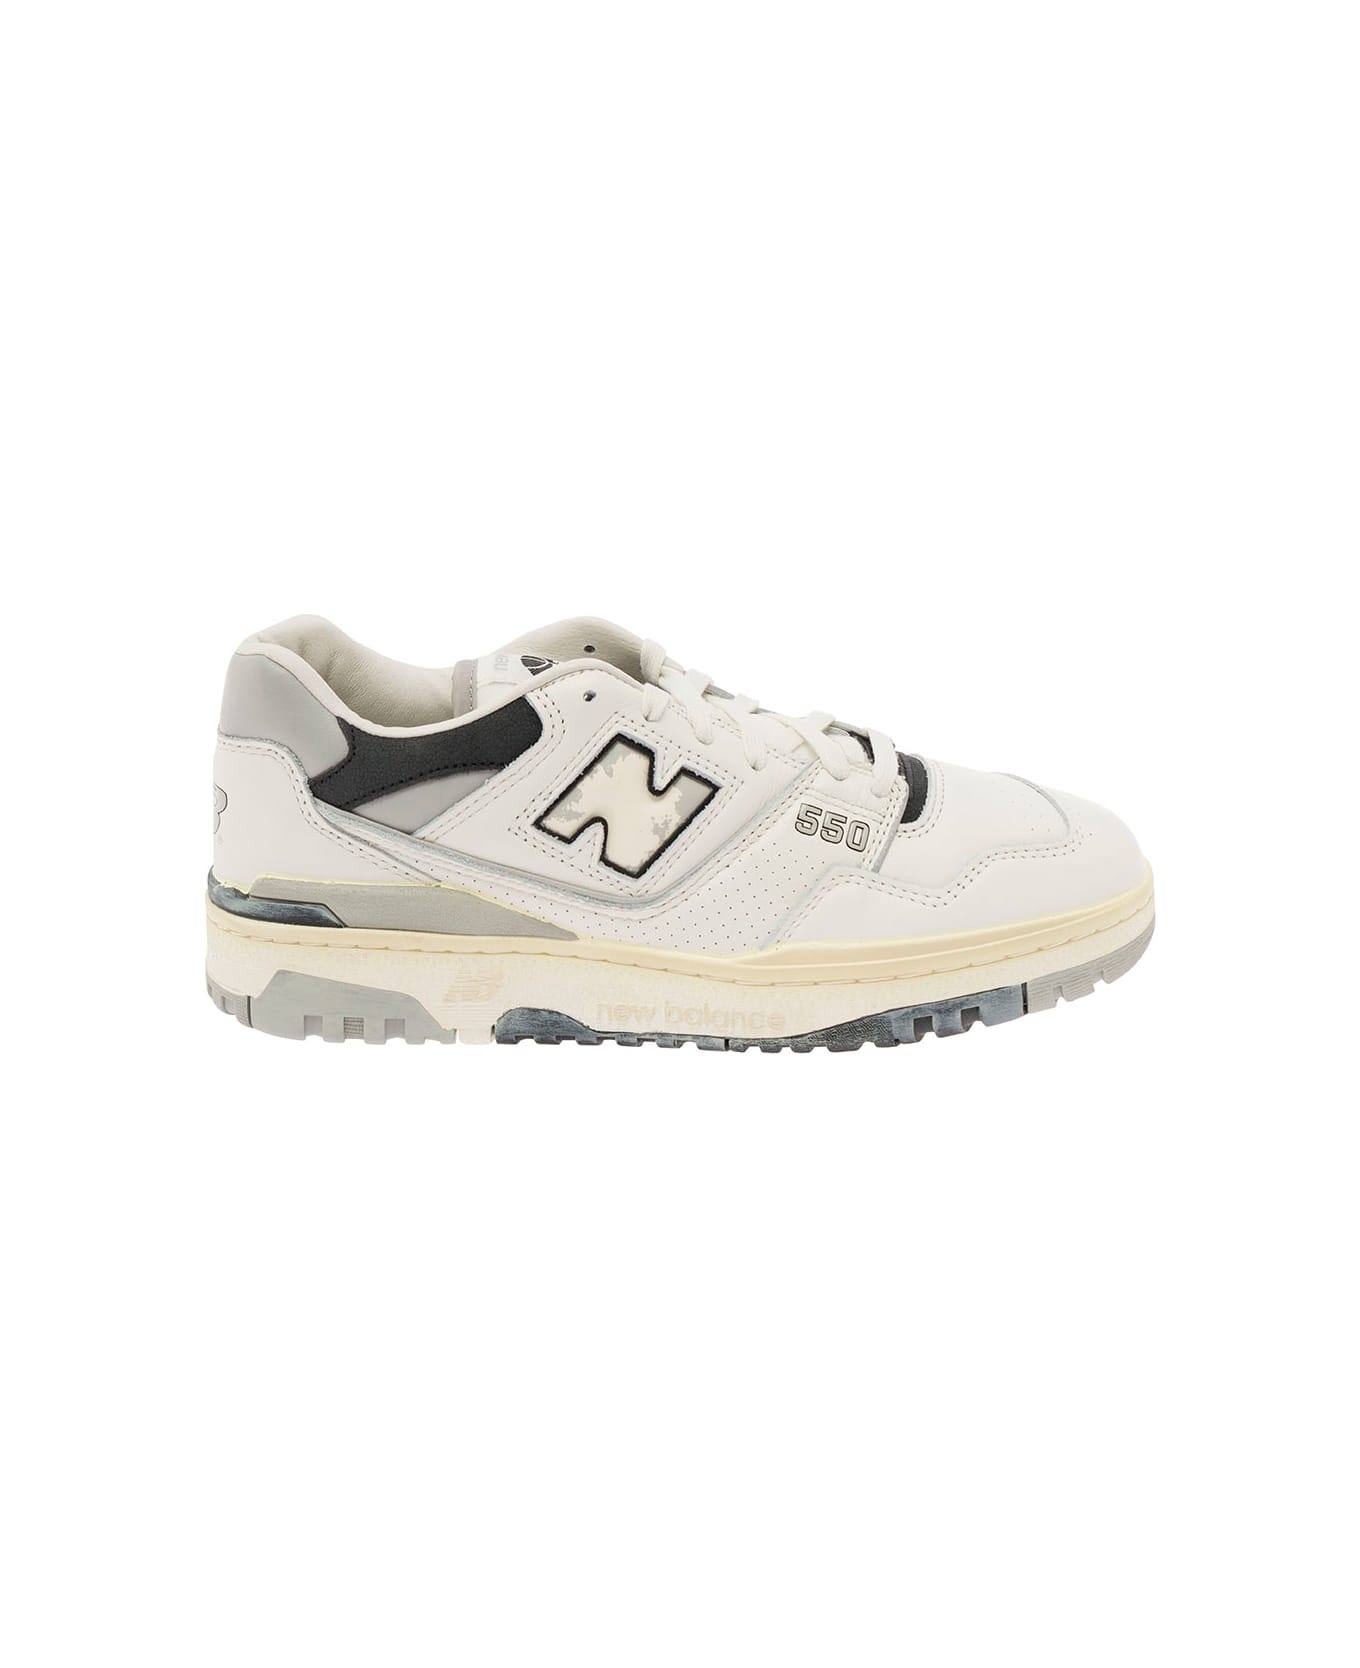 New Balance '550' White And Grey Low Top Sneakers With Logo And Contrasting Details In Leather Man - Grey